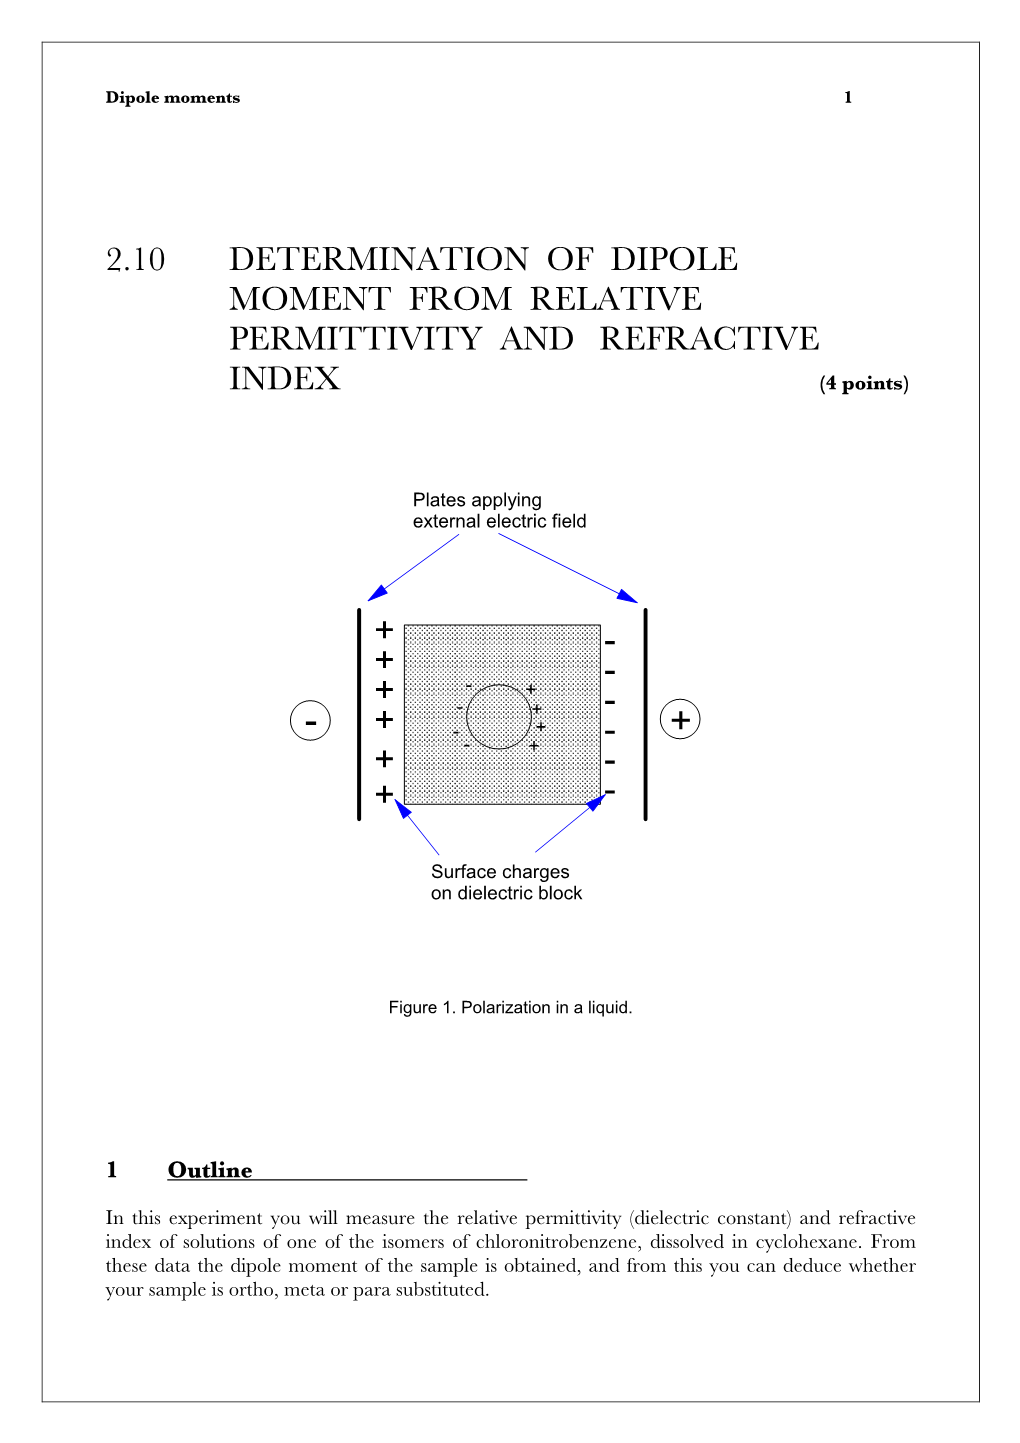 2.10 DETERMINATION of DIPOLE MOMENT from RELATIVE PERMITTIVITY and REFRACTIVE INDEX (4 Points)